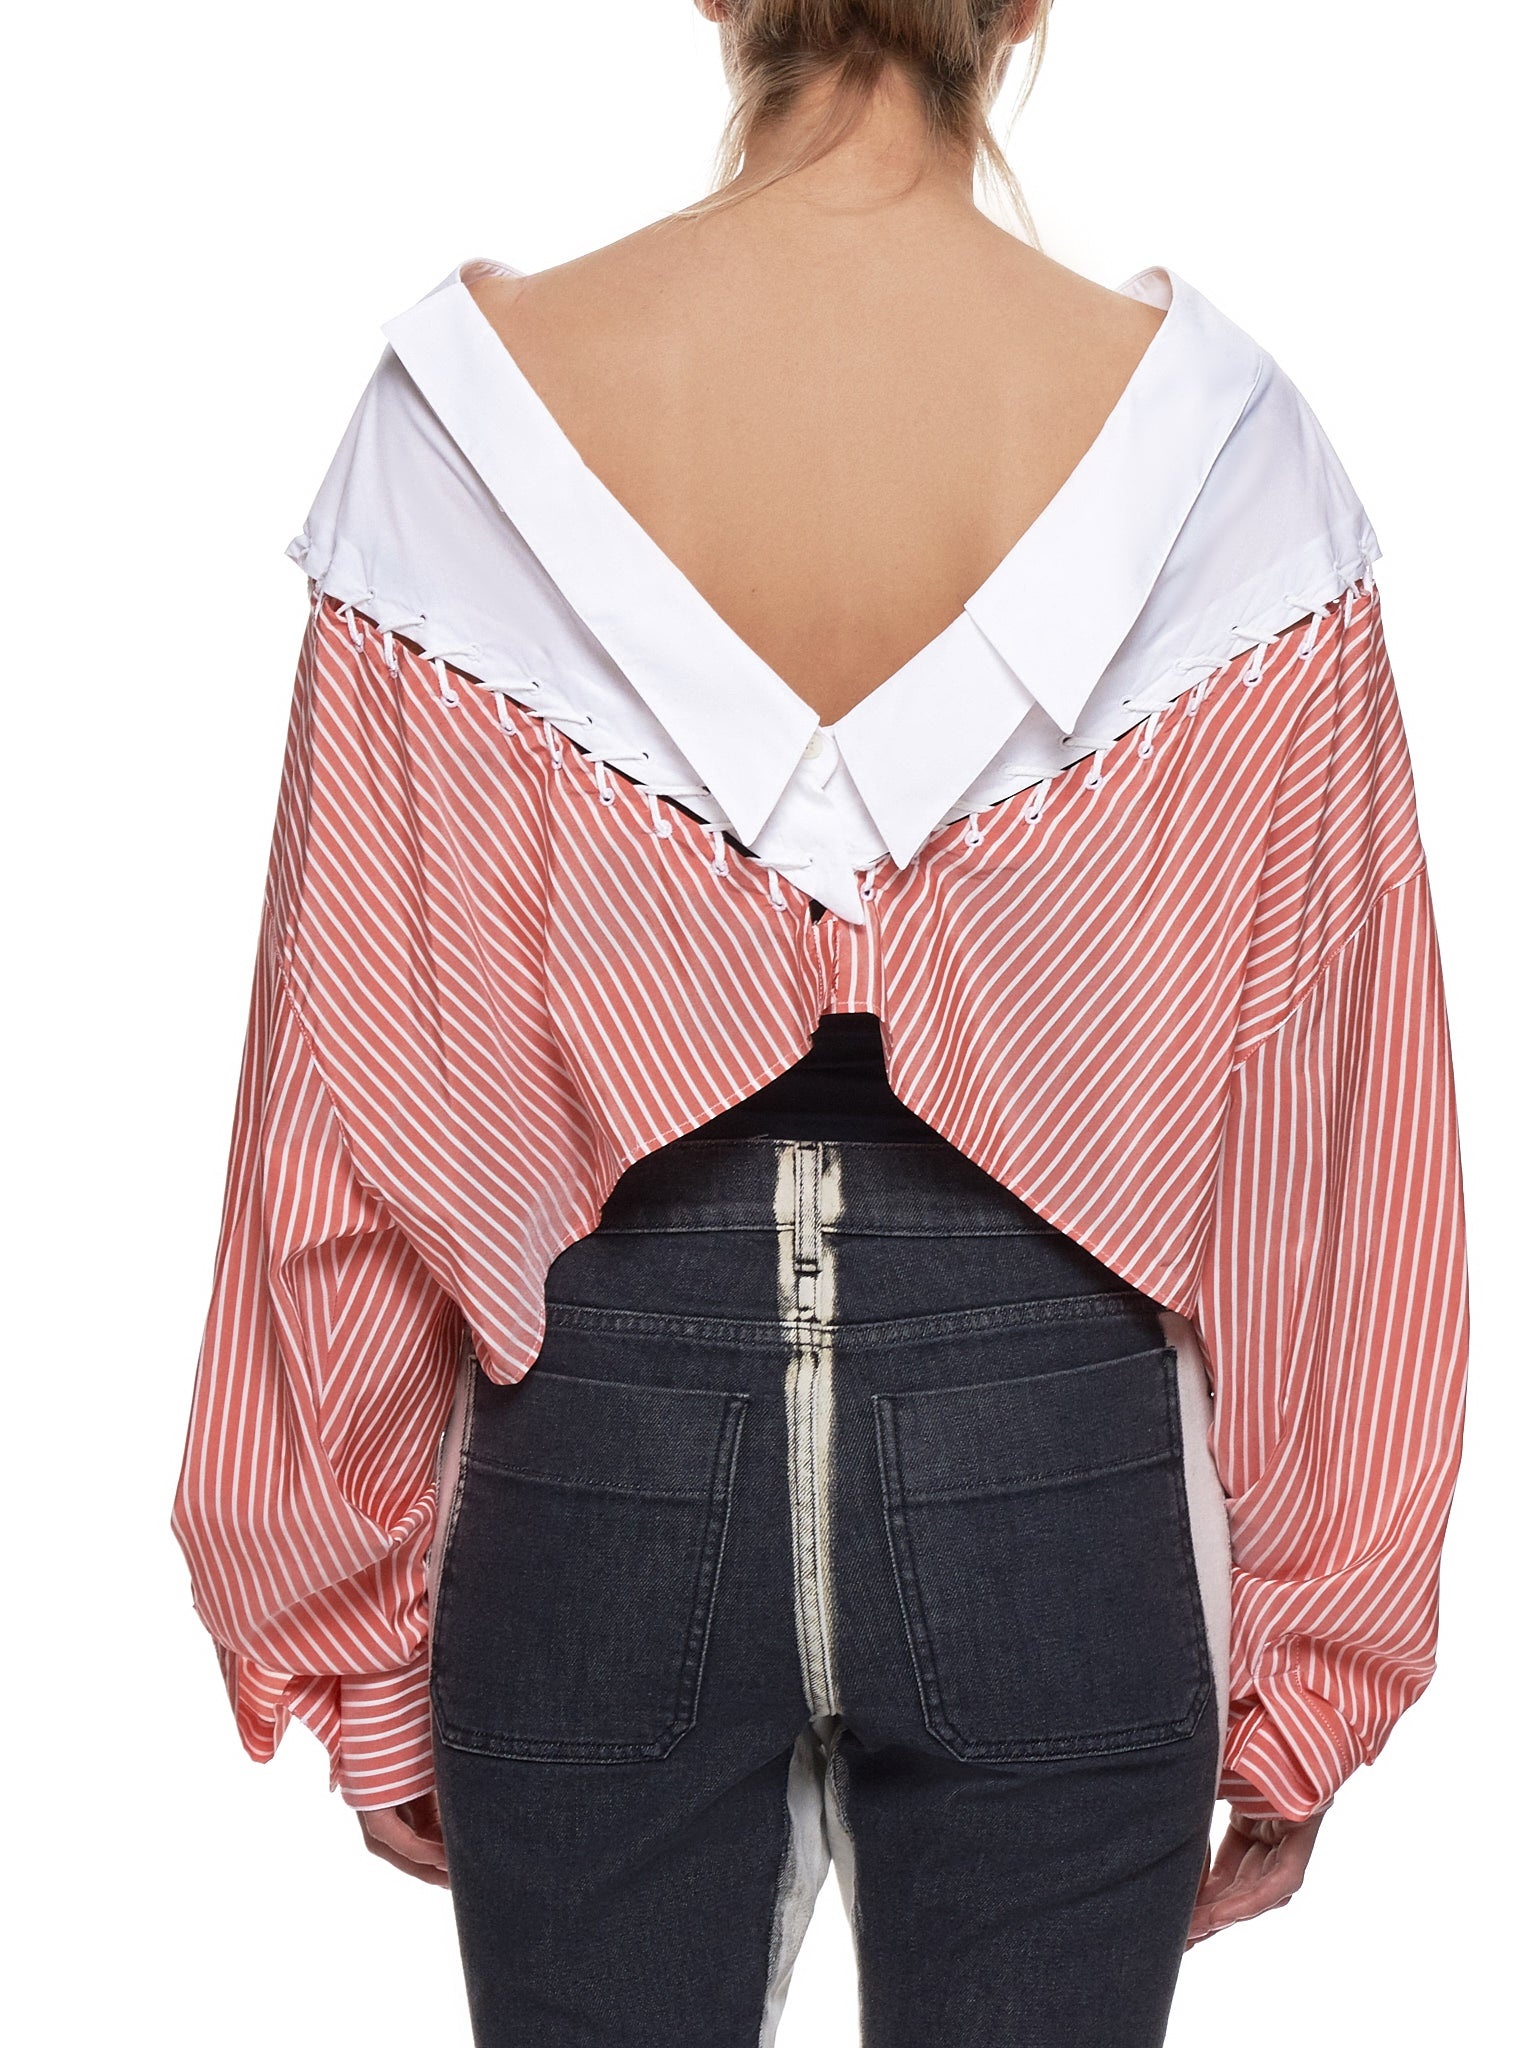 Lace Up Stripe Top - 3